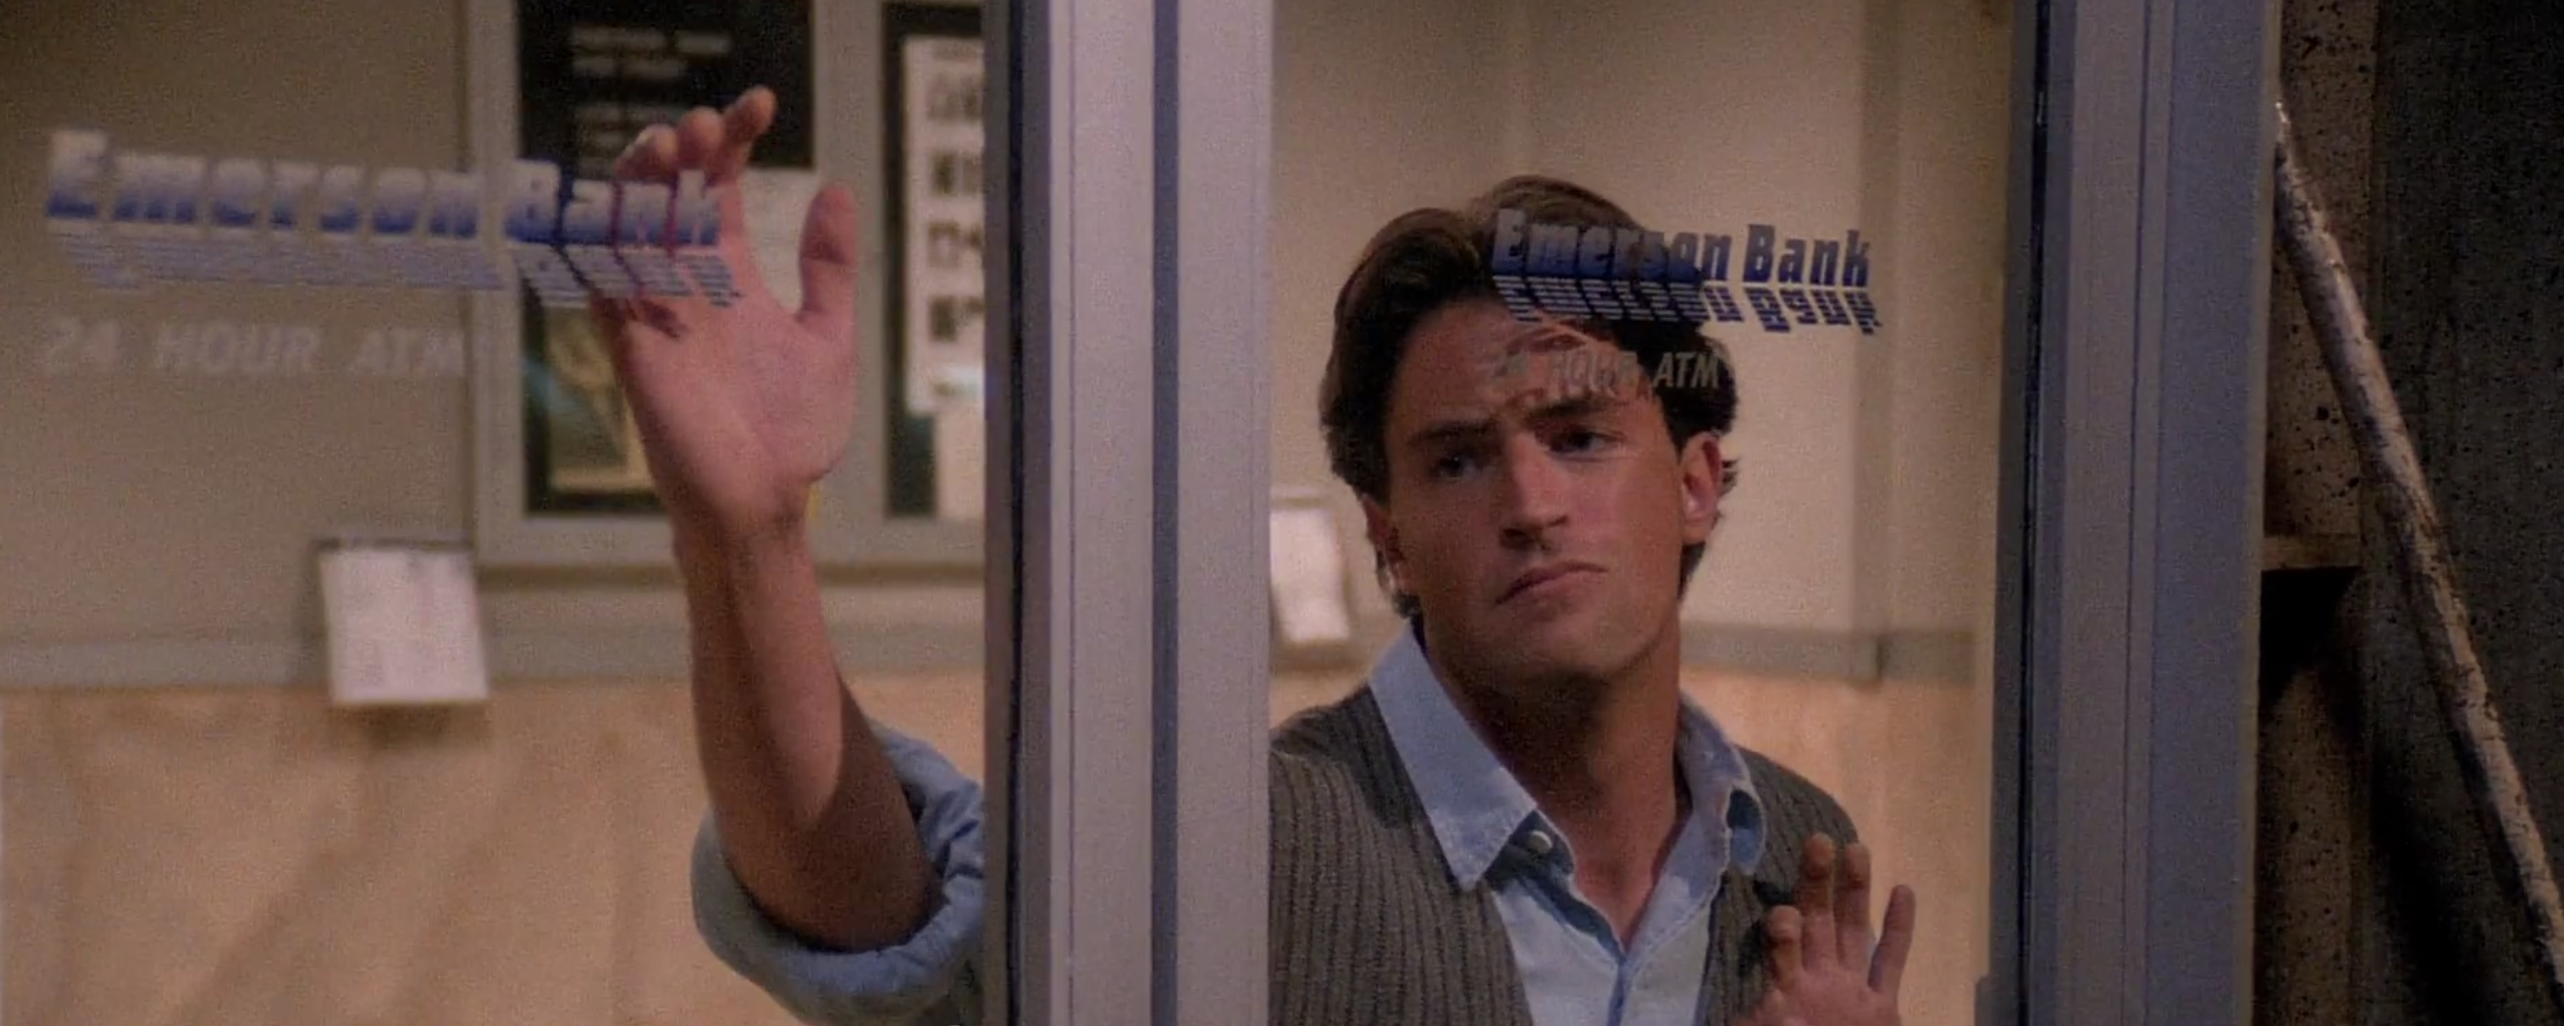 chandler bing slammed against the emerson bank atm vestibule doors wistfully recounting his night with jill